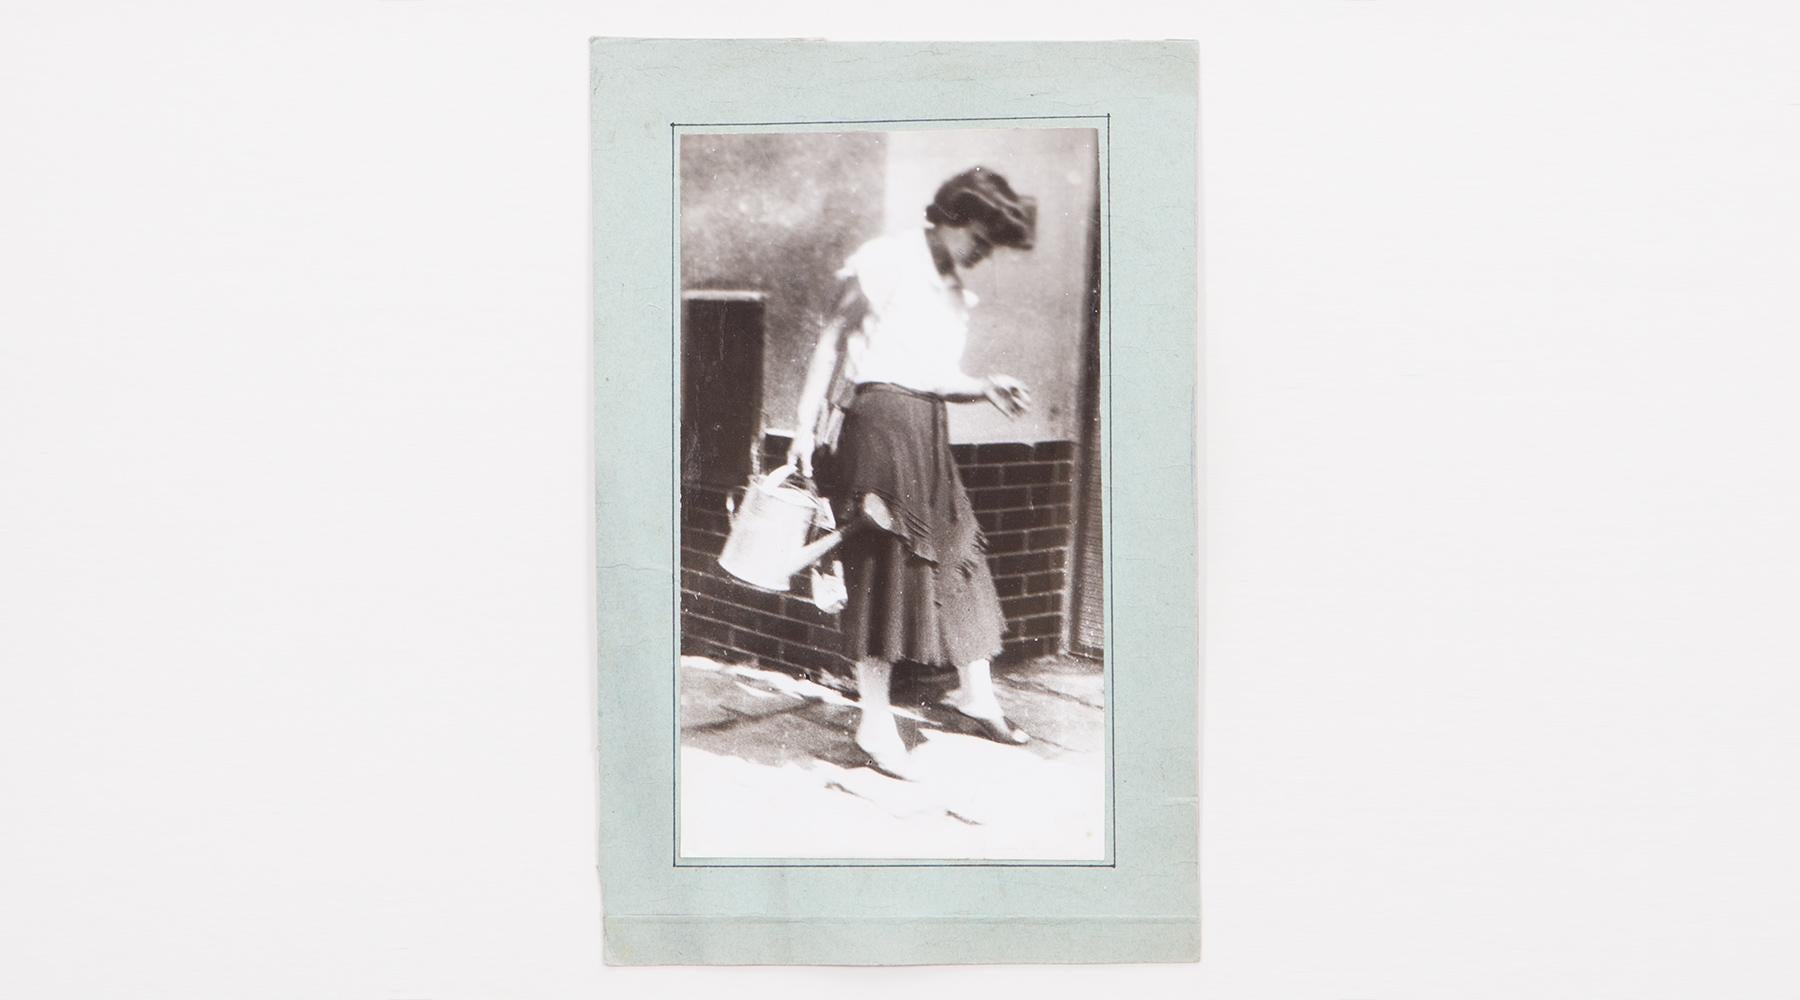 Original Miroslav Tichý b/w photography from 1970. Unique vintage gelatin silver print. Including black wooden frame in H 39.5 / W 29.5 cm. The picture shows a lady with a watering can in her hand.

Miroslav Tichý was a Czech photographer who